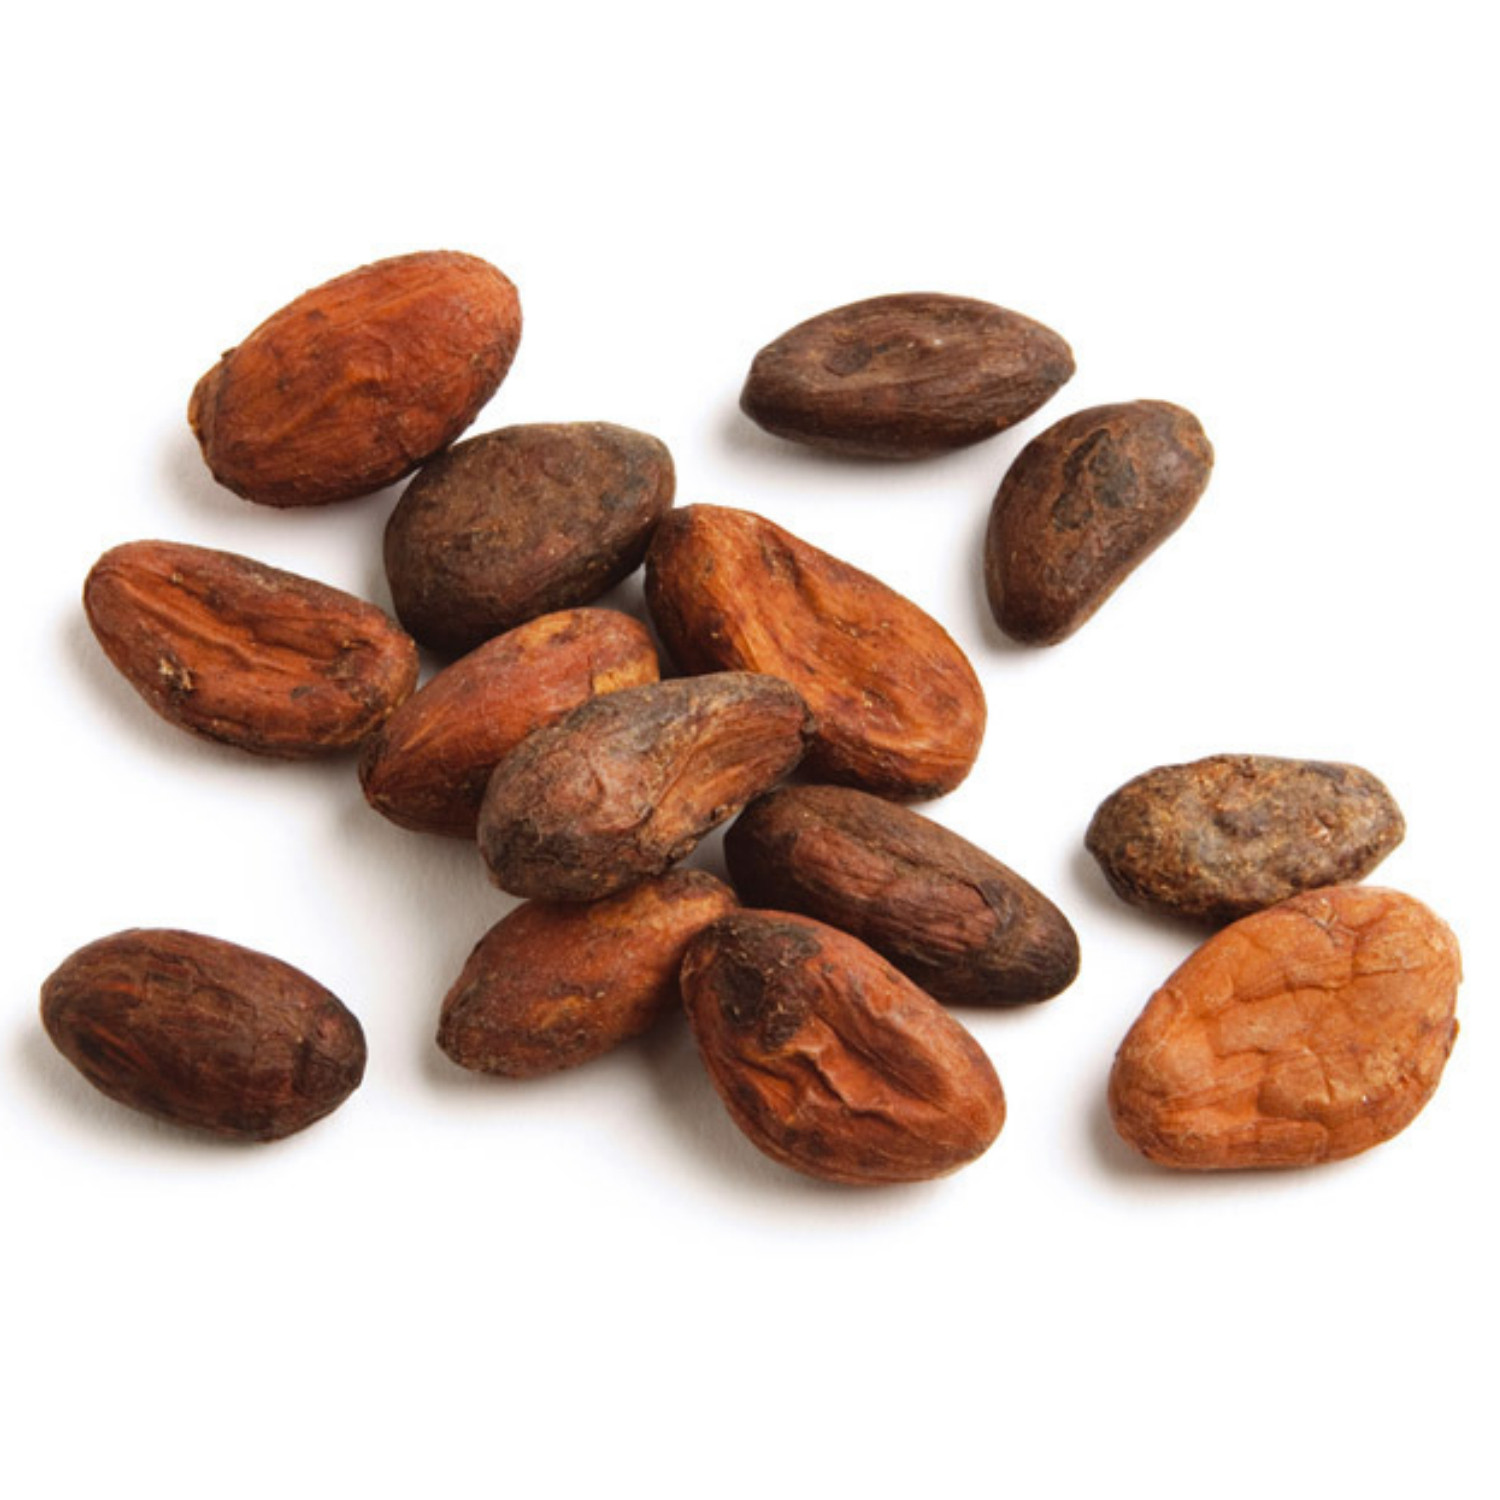 Cacao originated in Central and South America more than 4,000 years ago.